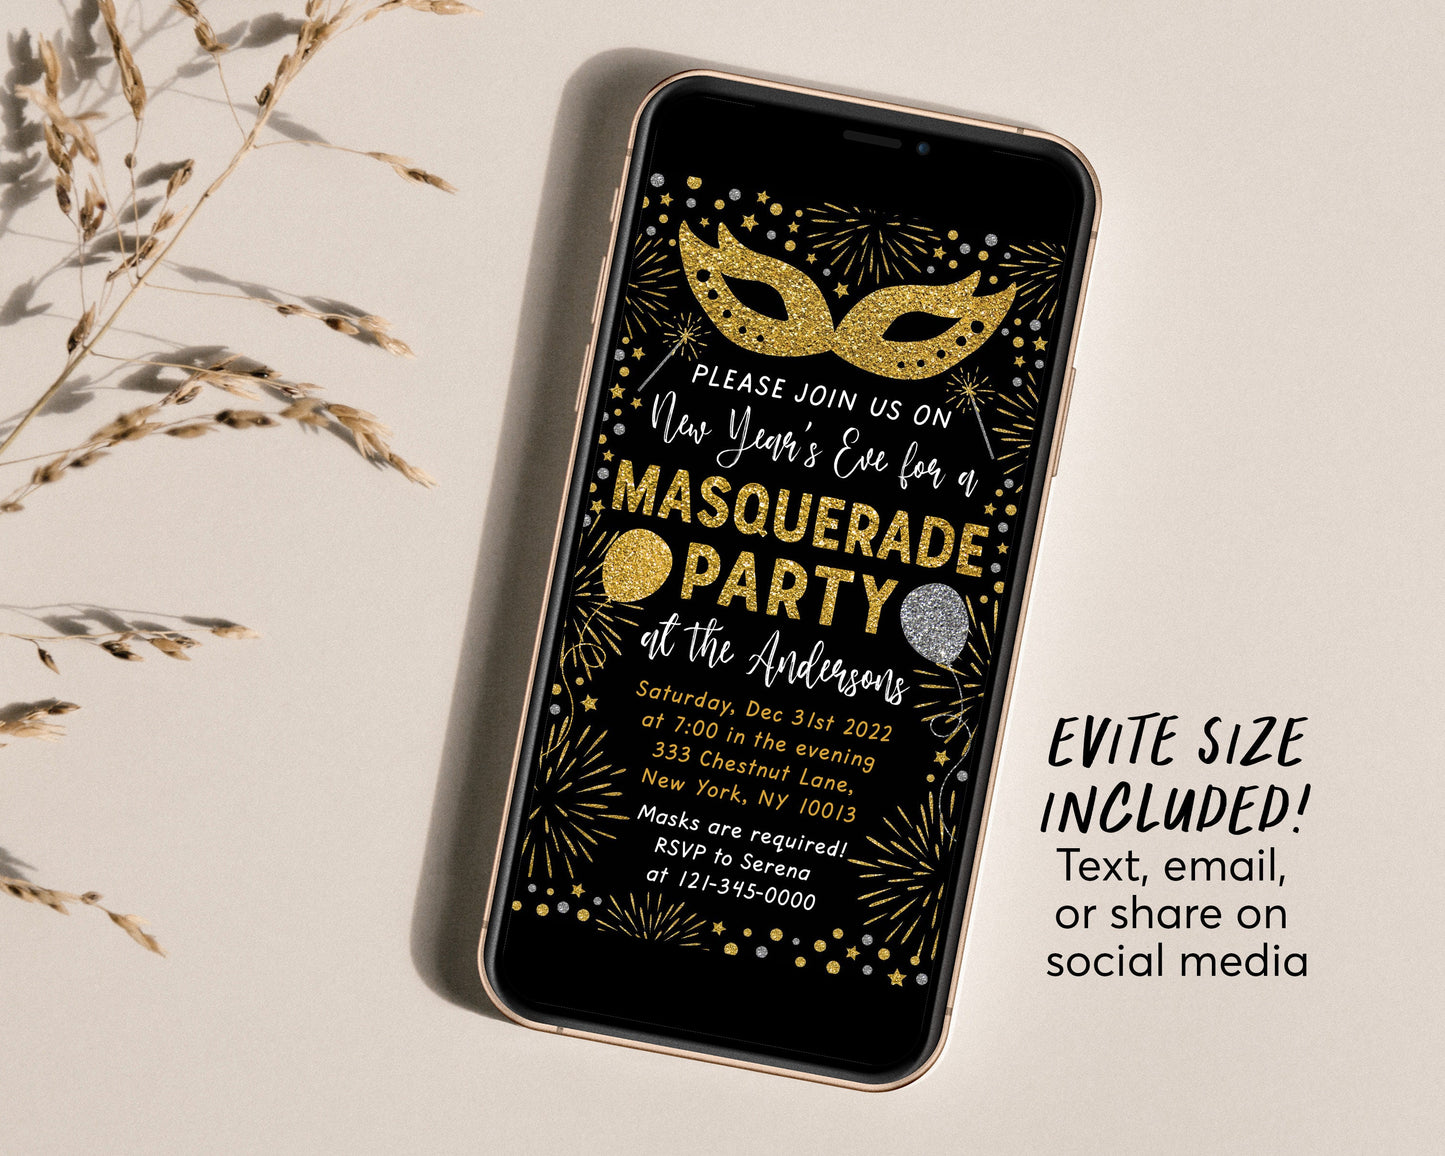 Masquerade Party Invitation Editable Template, New Years Eve Party Invite, Gold Mask Invite Printable For Adults, Masked Party Bash Evite